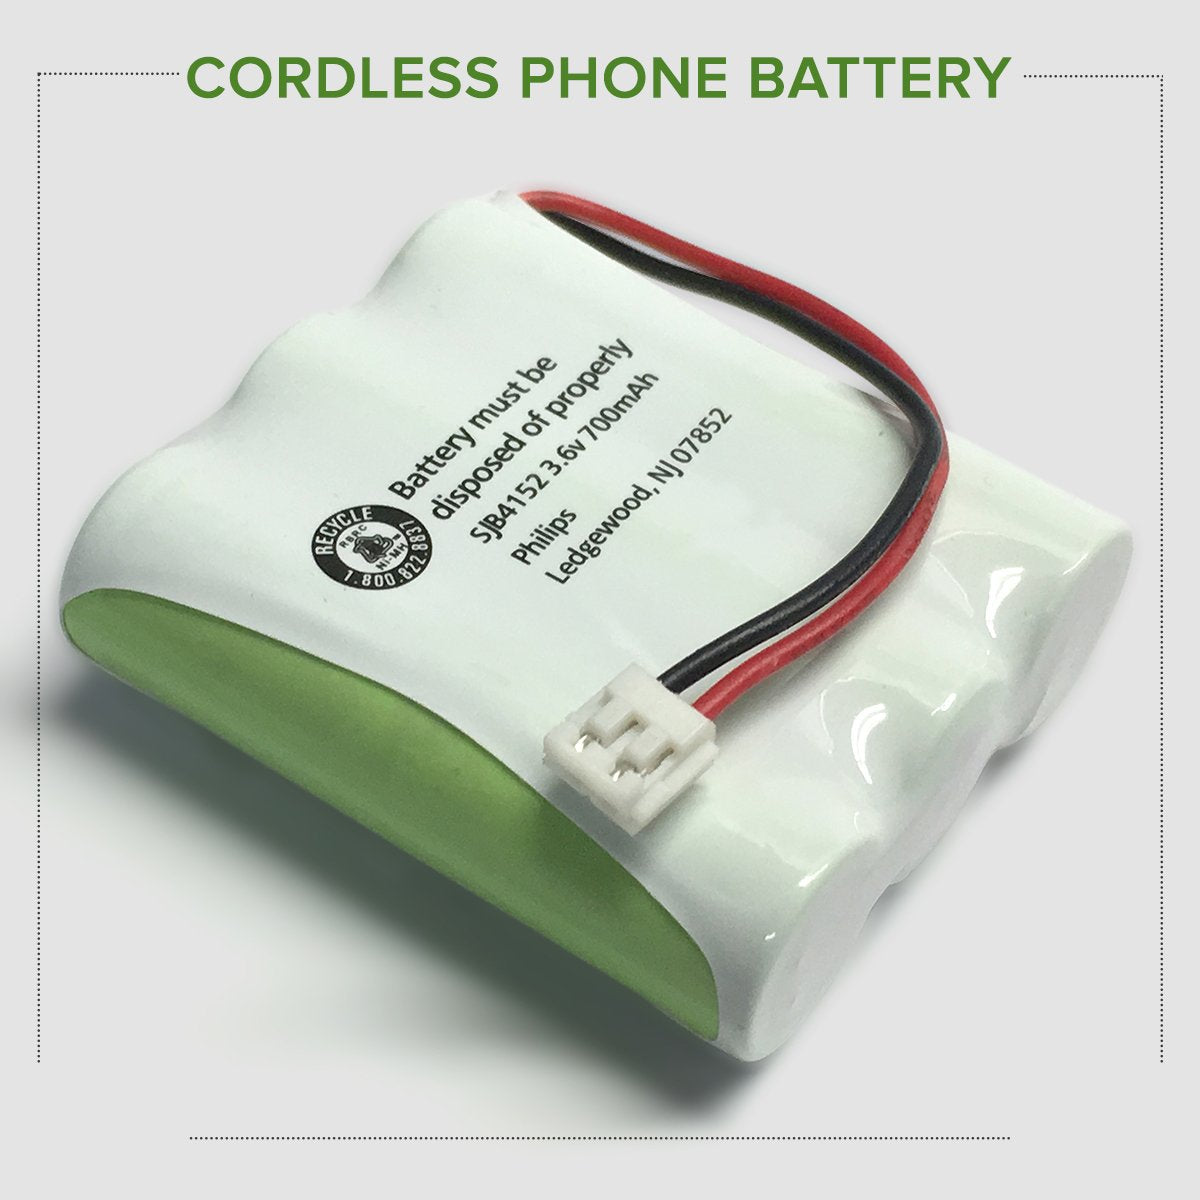 GE 2-6921GE1-A Cordless Phone Battery